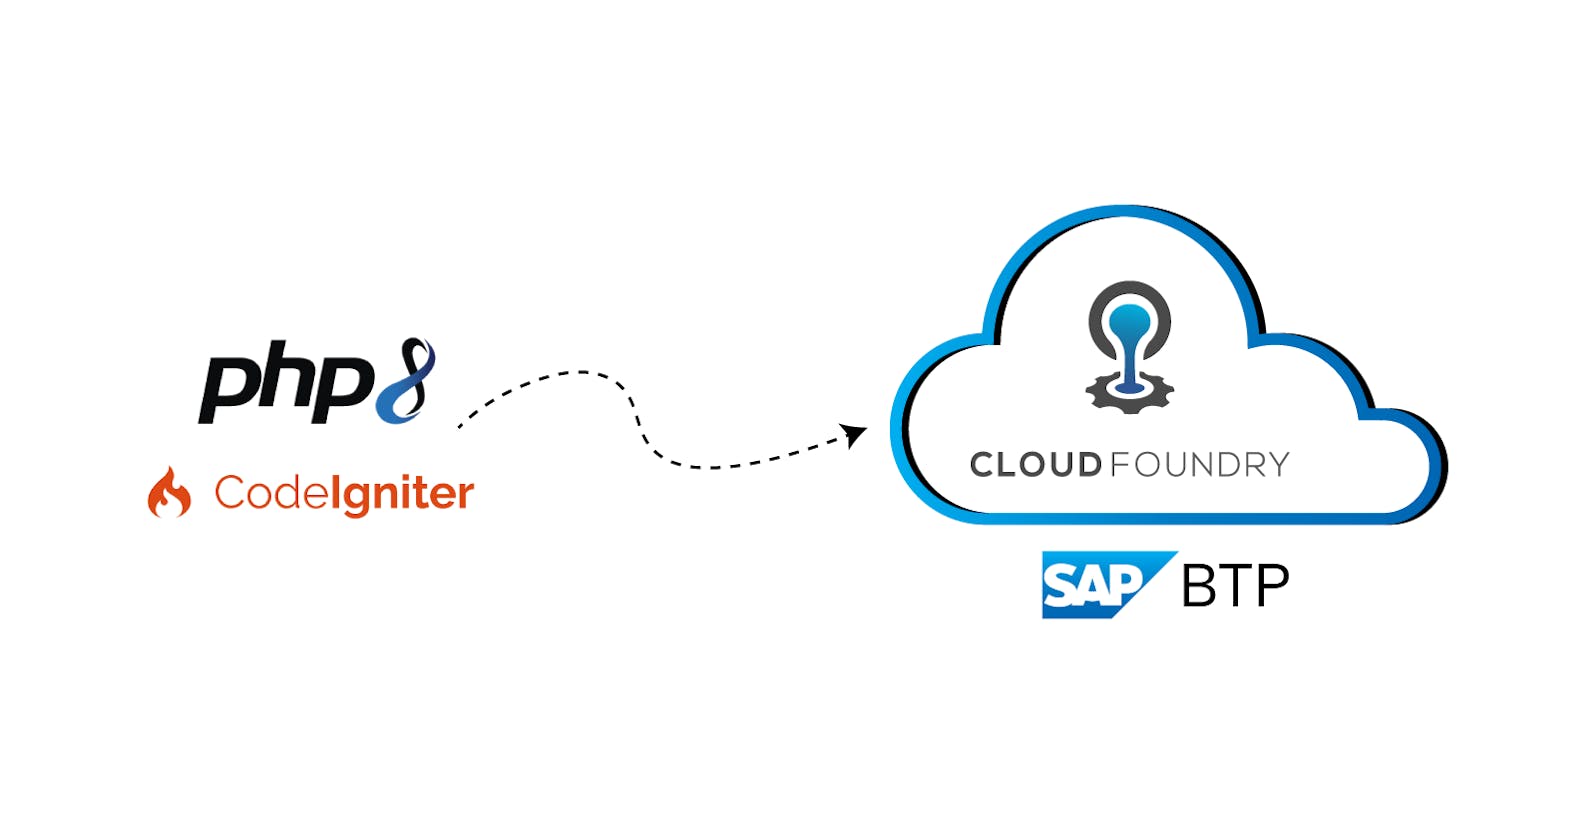 Deploying a PHP CodeIgniter 4 application to SAP BTP Cloud Foundry